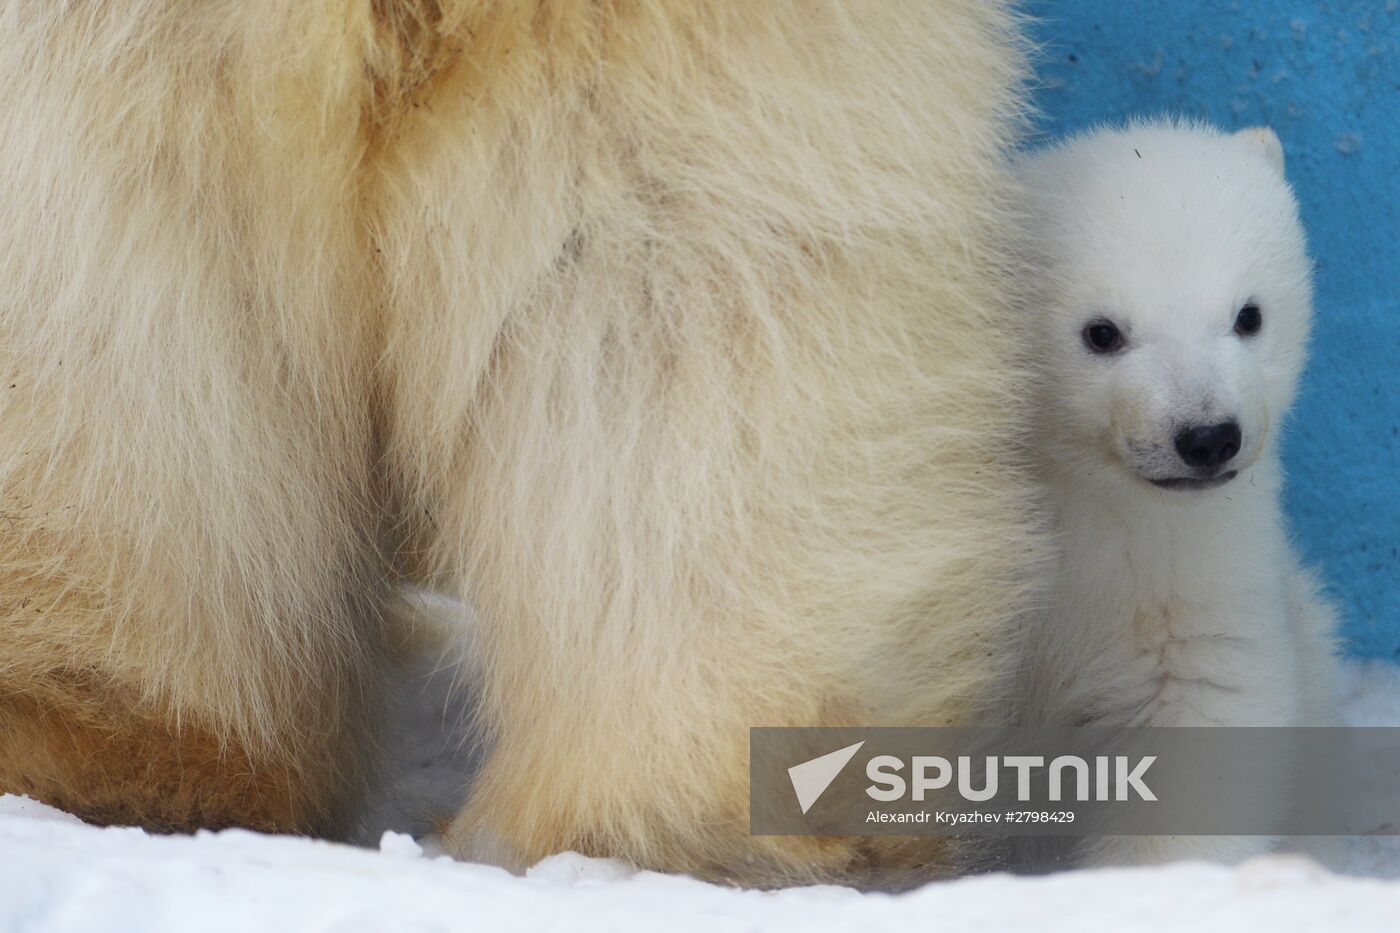 Novosibirsk Zoo shows off its latest addition to the family